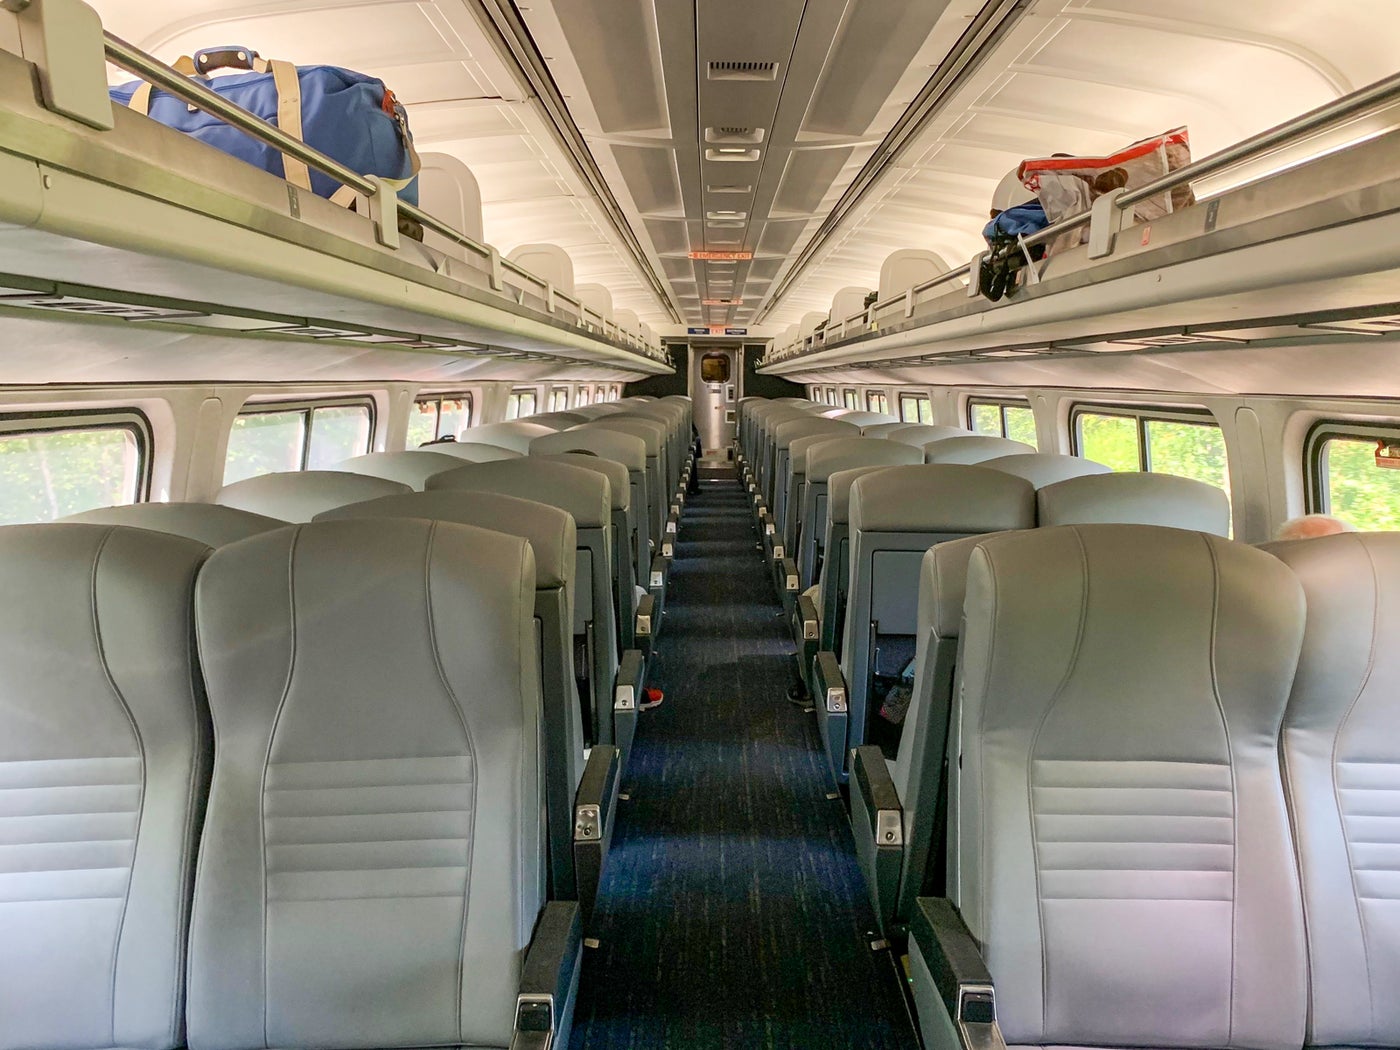 Review Amtrak's Adirondack train from New York to Montreal